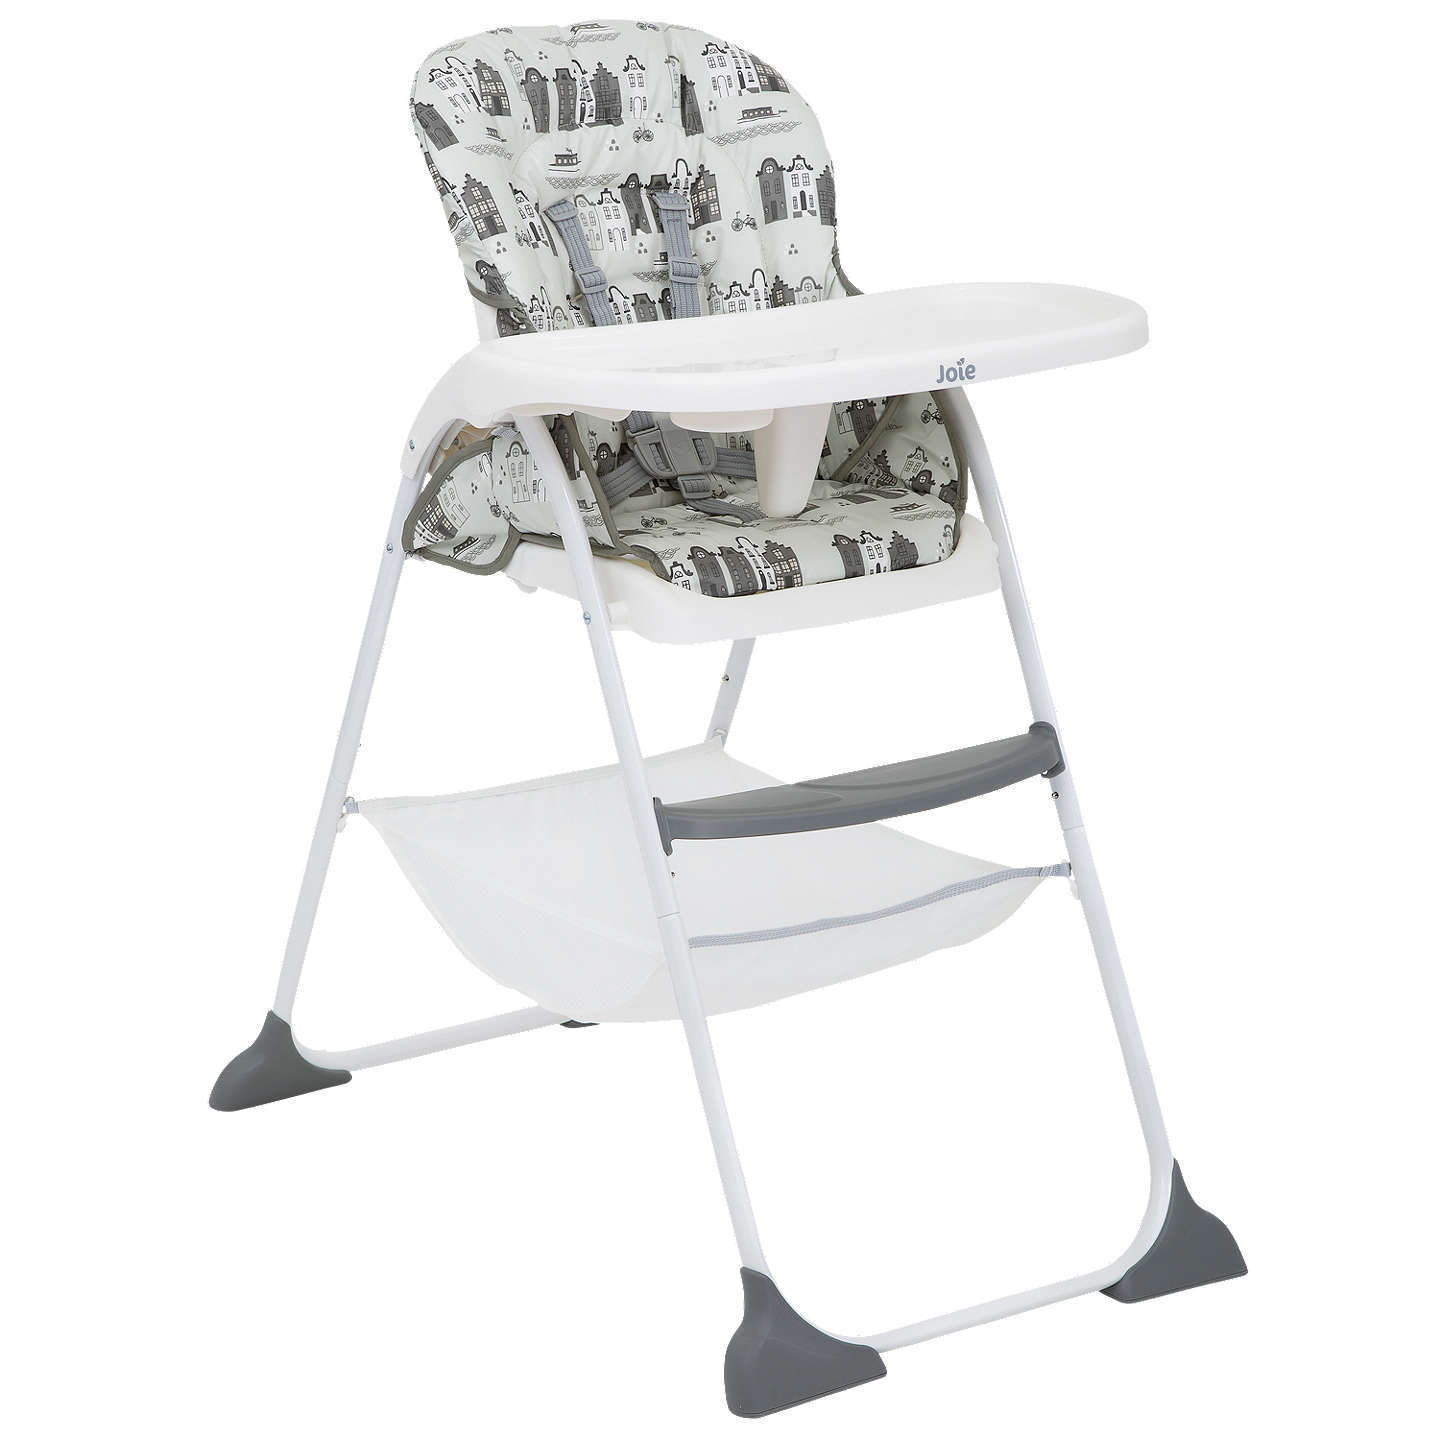 Creatice Baby High Chair Joie Mimzy with Simple Decor